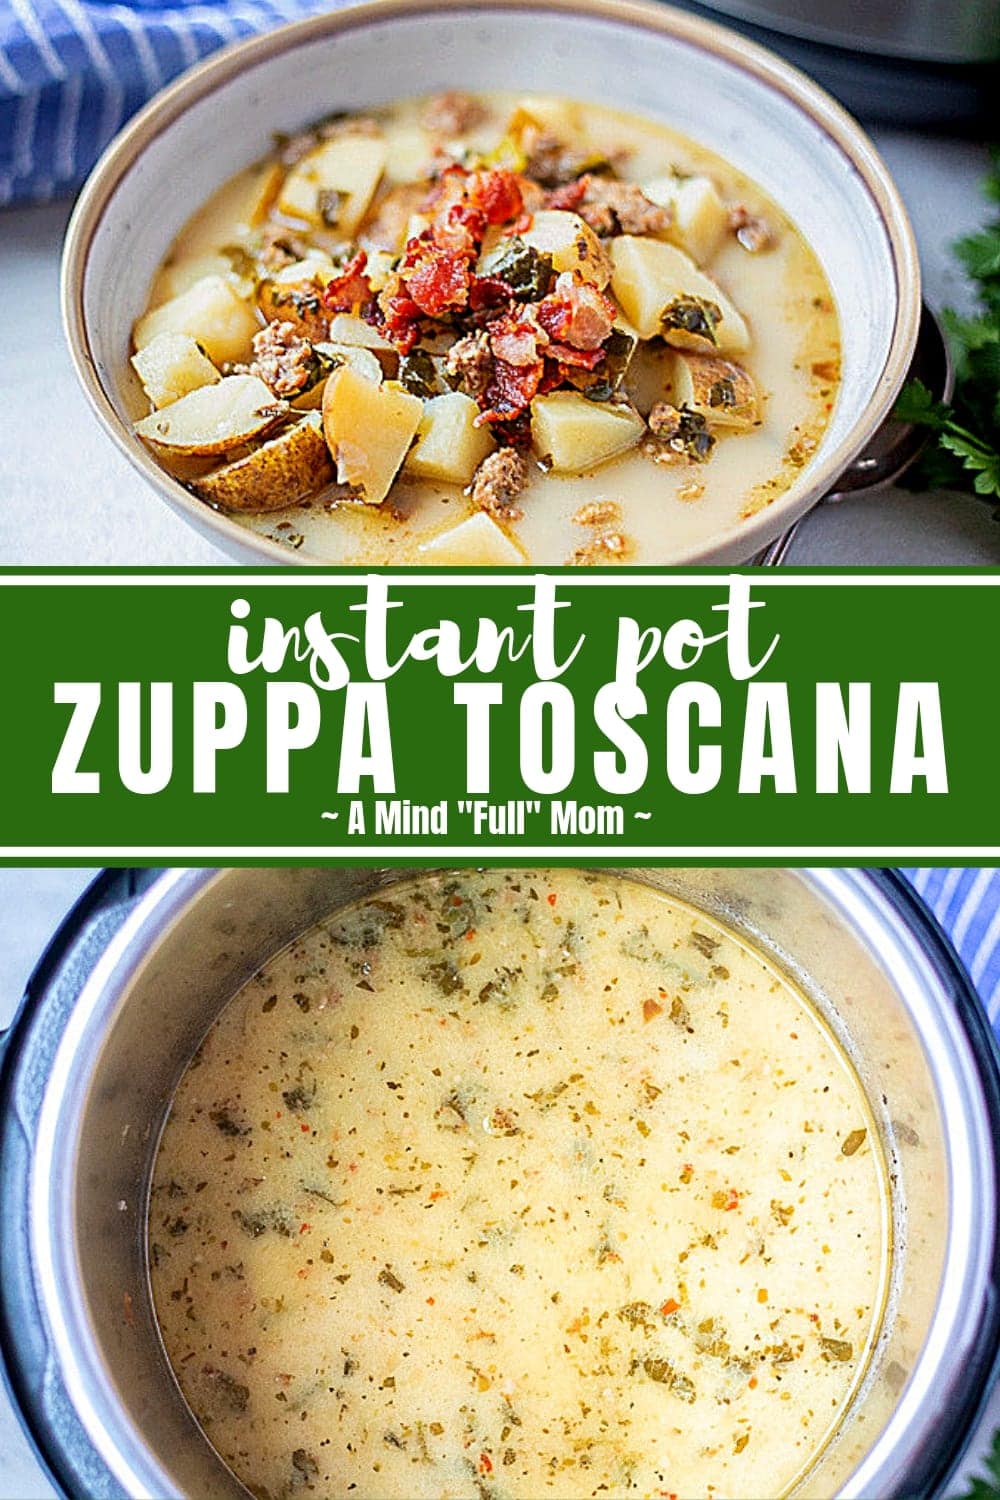 The entire family will love this Instant Pot Zuppa Toscana Soup! This creamy, hearty soup made with bacon, sausage, kale, and potatoes, will be on your table in 30 minutes and tastes better than Olive Garden's version!